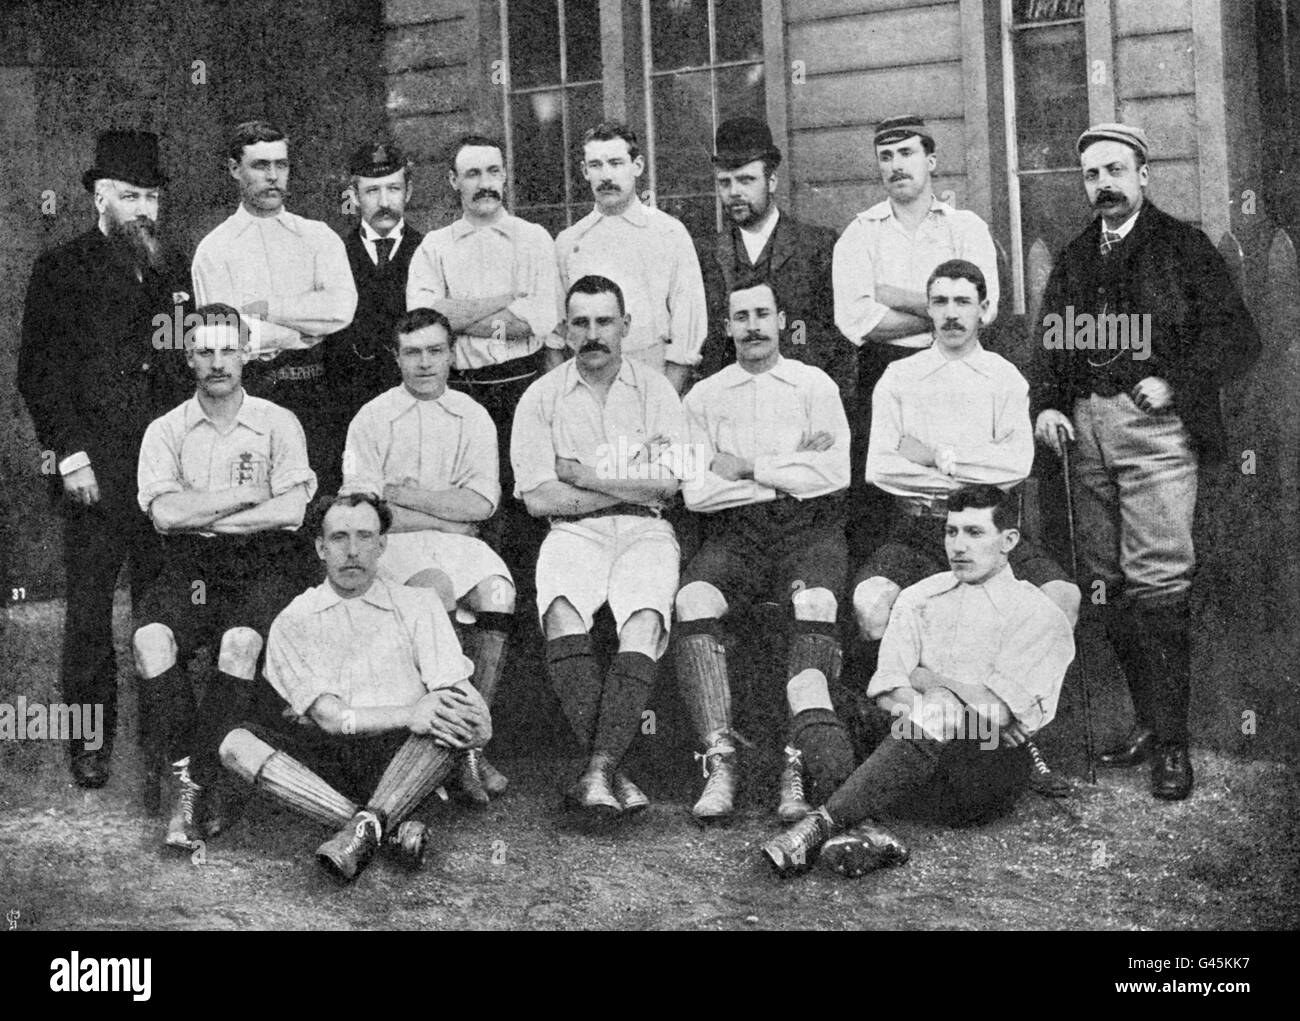 The English League side who beat a Scottish League side that year by 4 goals to 3 at Celtic Park, Glasgow. (top l-r) William McGregor (Founder of the Football League), Thomas Clare, John J. Bentley (Chairman of the Football League Division one, later President of the Football League), John Southworth, Charles Perry, R Molyneux, William Rowley and Harry Lockett (Football League Secretary). (middle row l-r) William Bassett, Fred Geary, Robert Howarth, Harry Wood and Joseph Schofield. (front l-r) John Reynolds and Ernest Needham Stock Photo